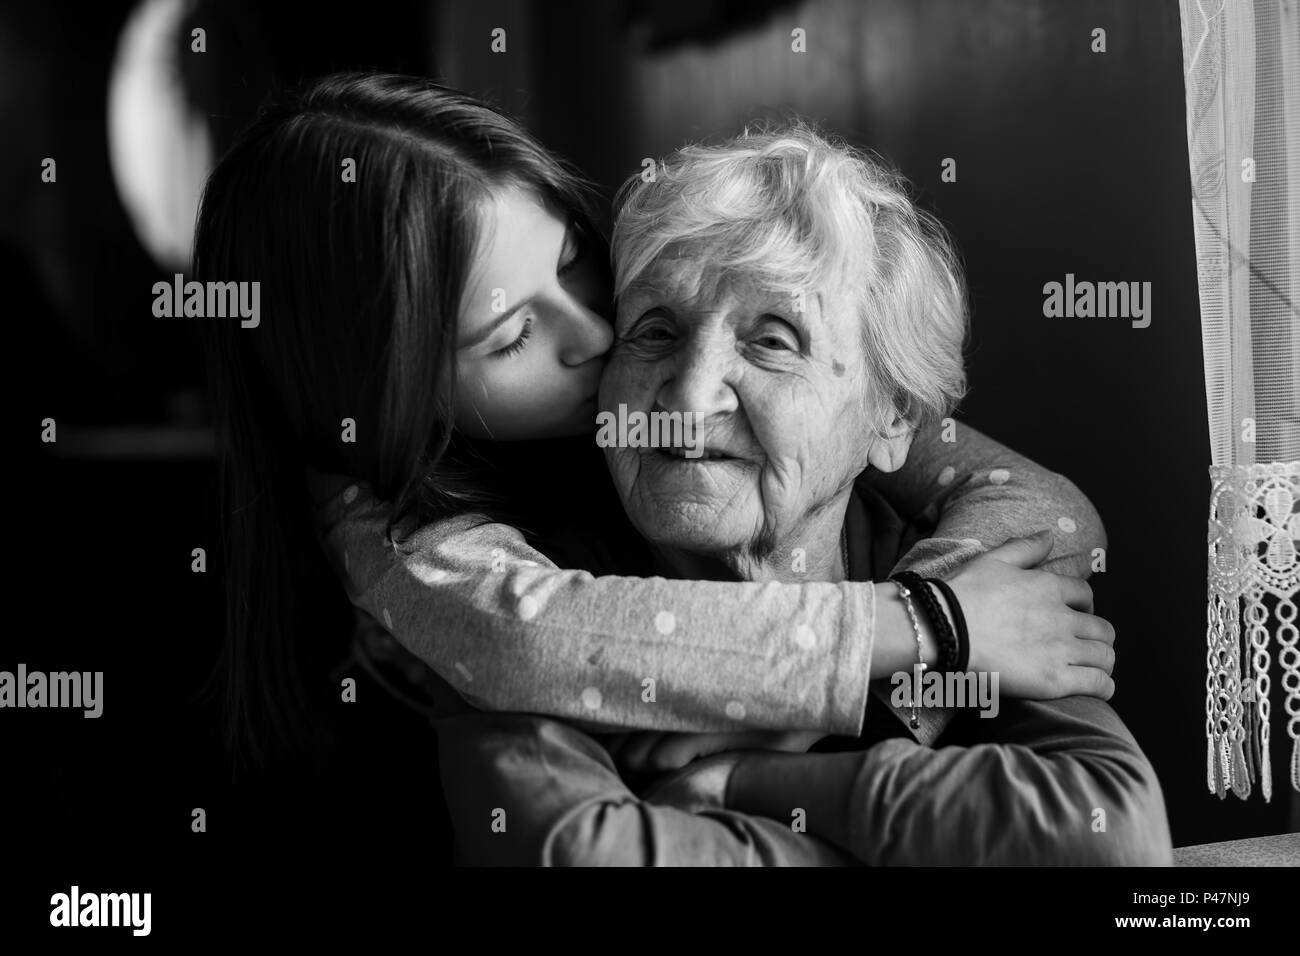 A little girl hugs her grandmother. Black and white photo. Stock Photo